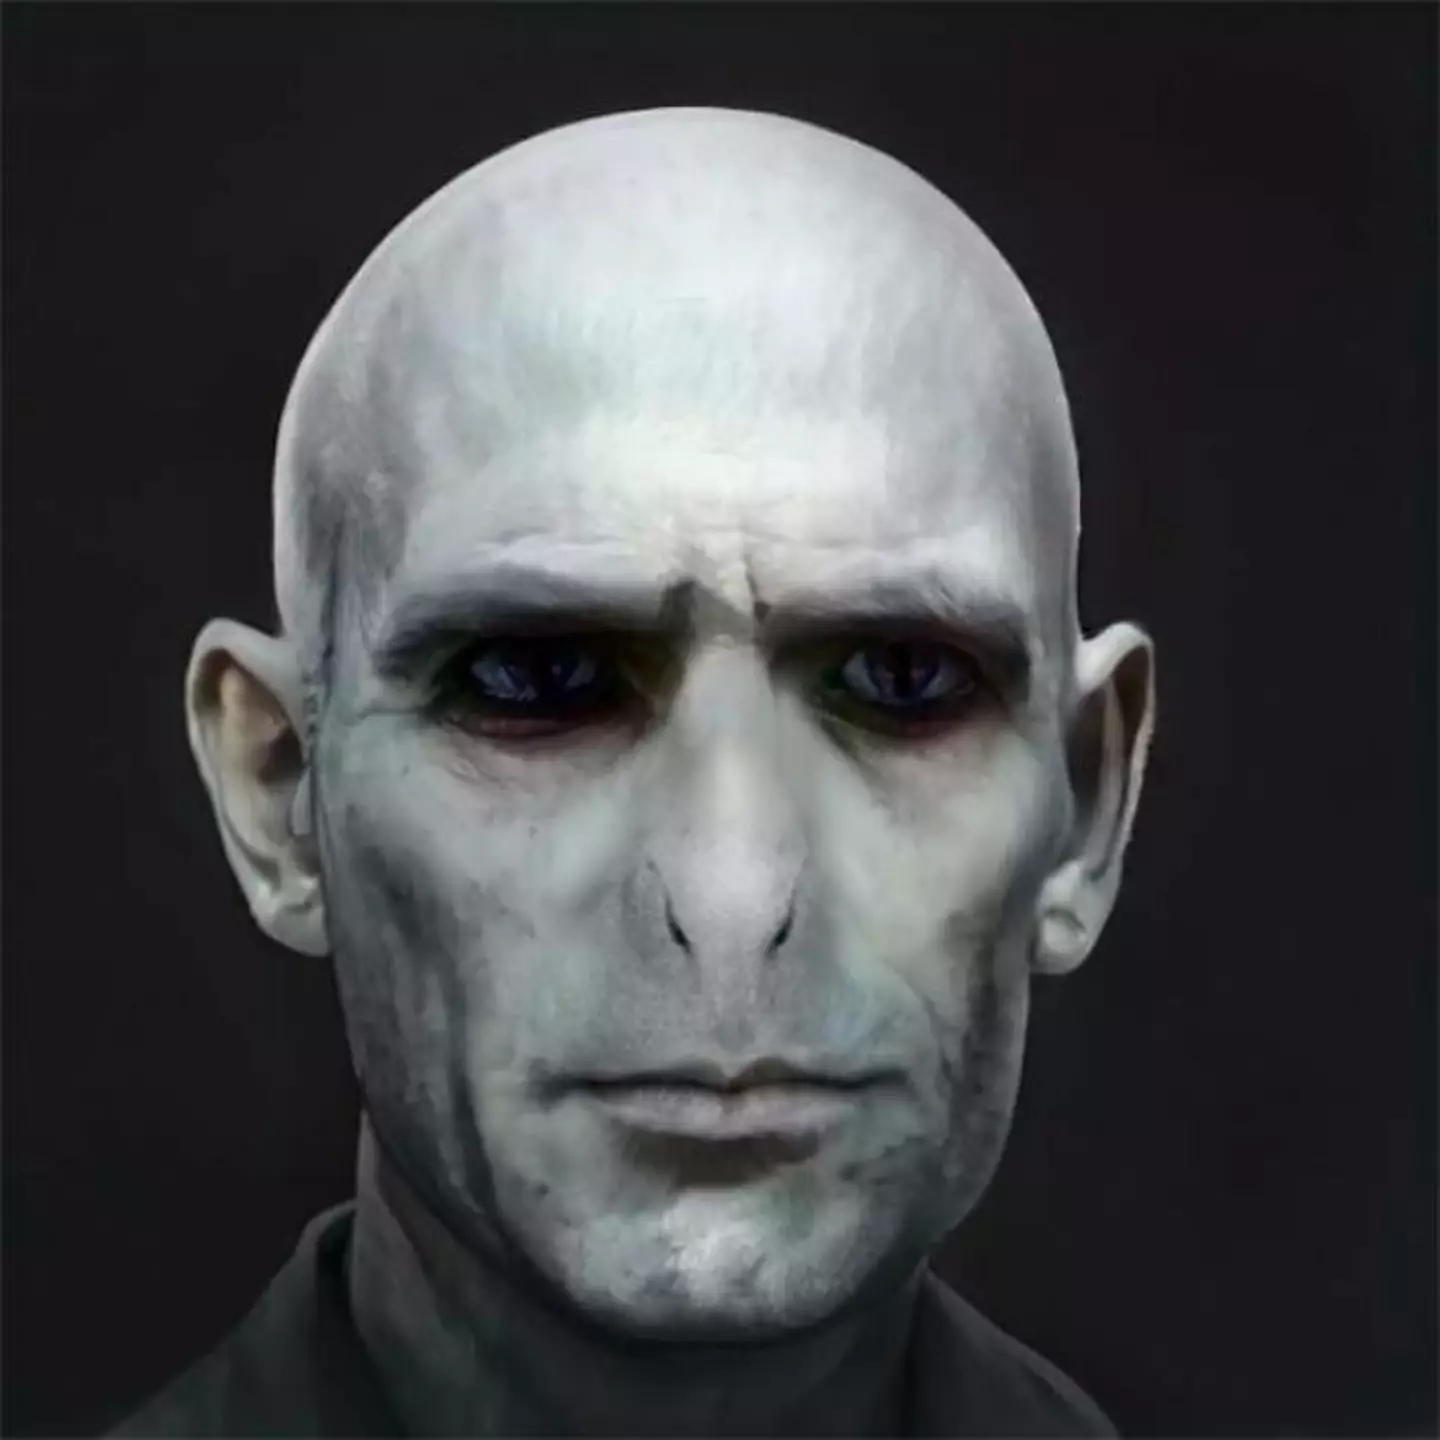 Voldemort looked virtually identical to the film adaptation.